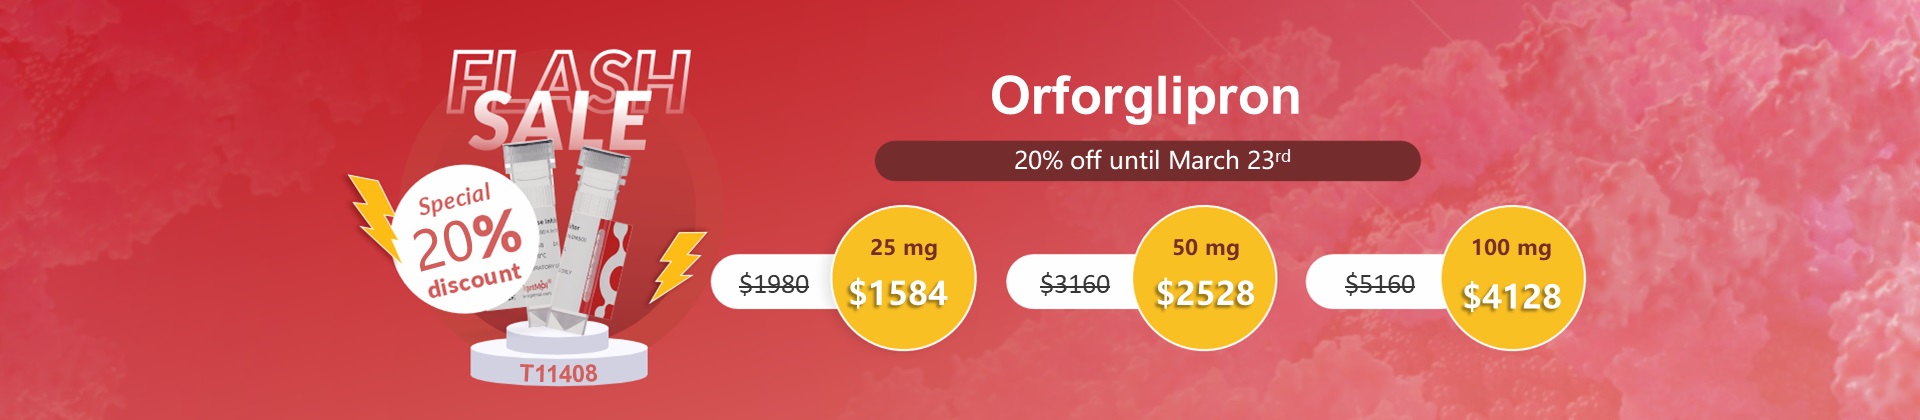 Orforglipron Special 80% discount